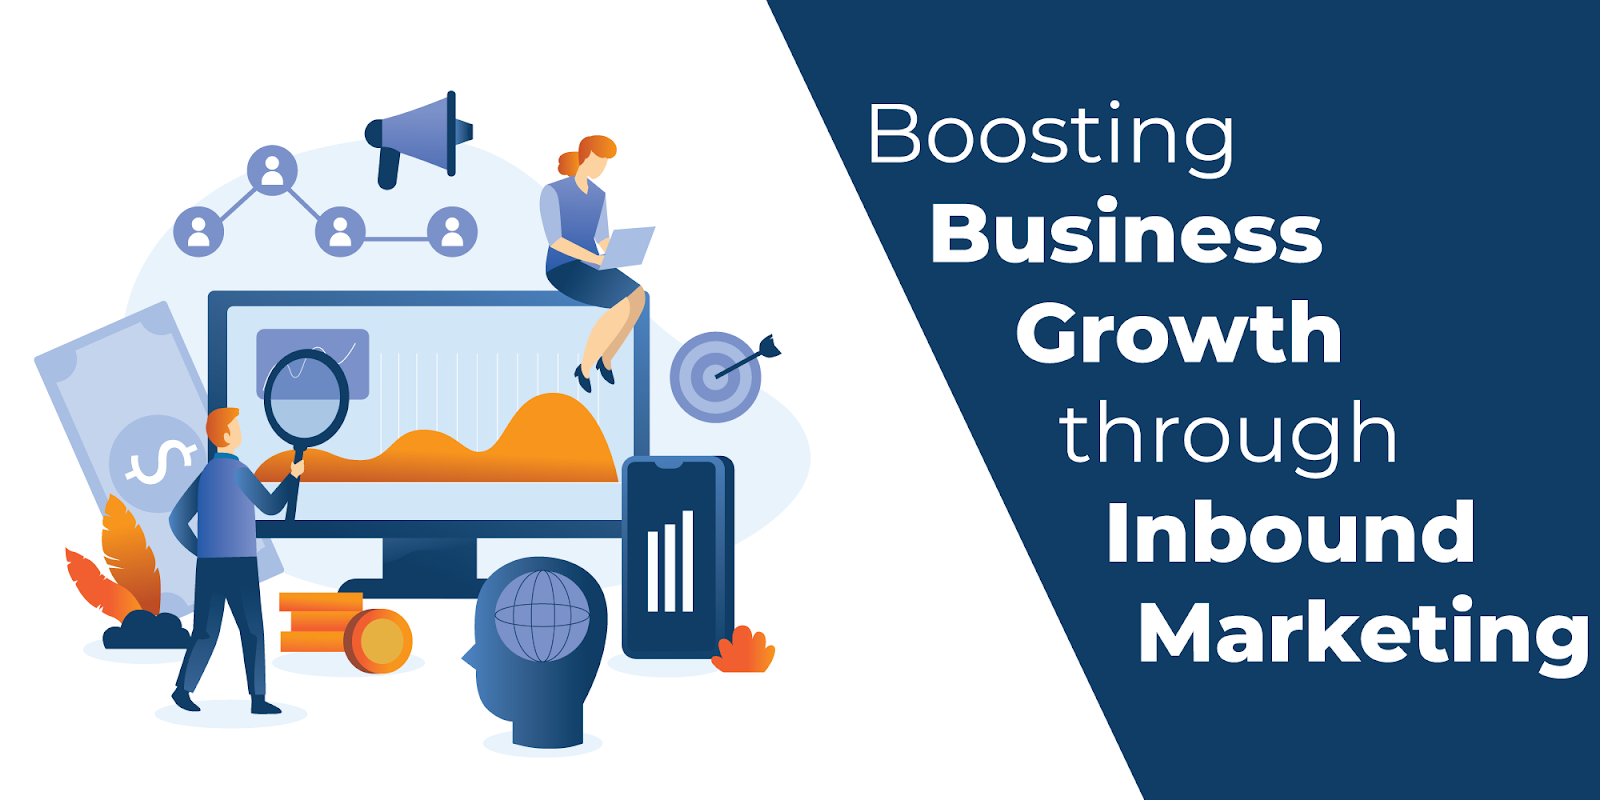 Boosting Business Growth Through Inbound Marketing by The Digital Edge